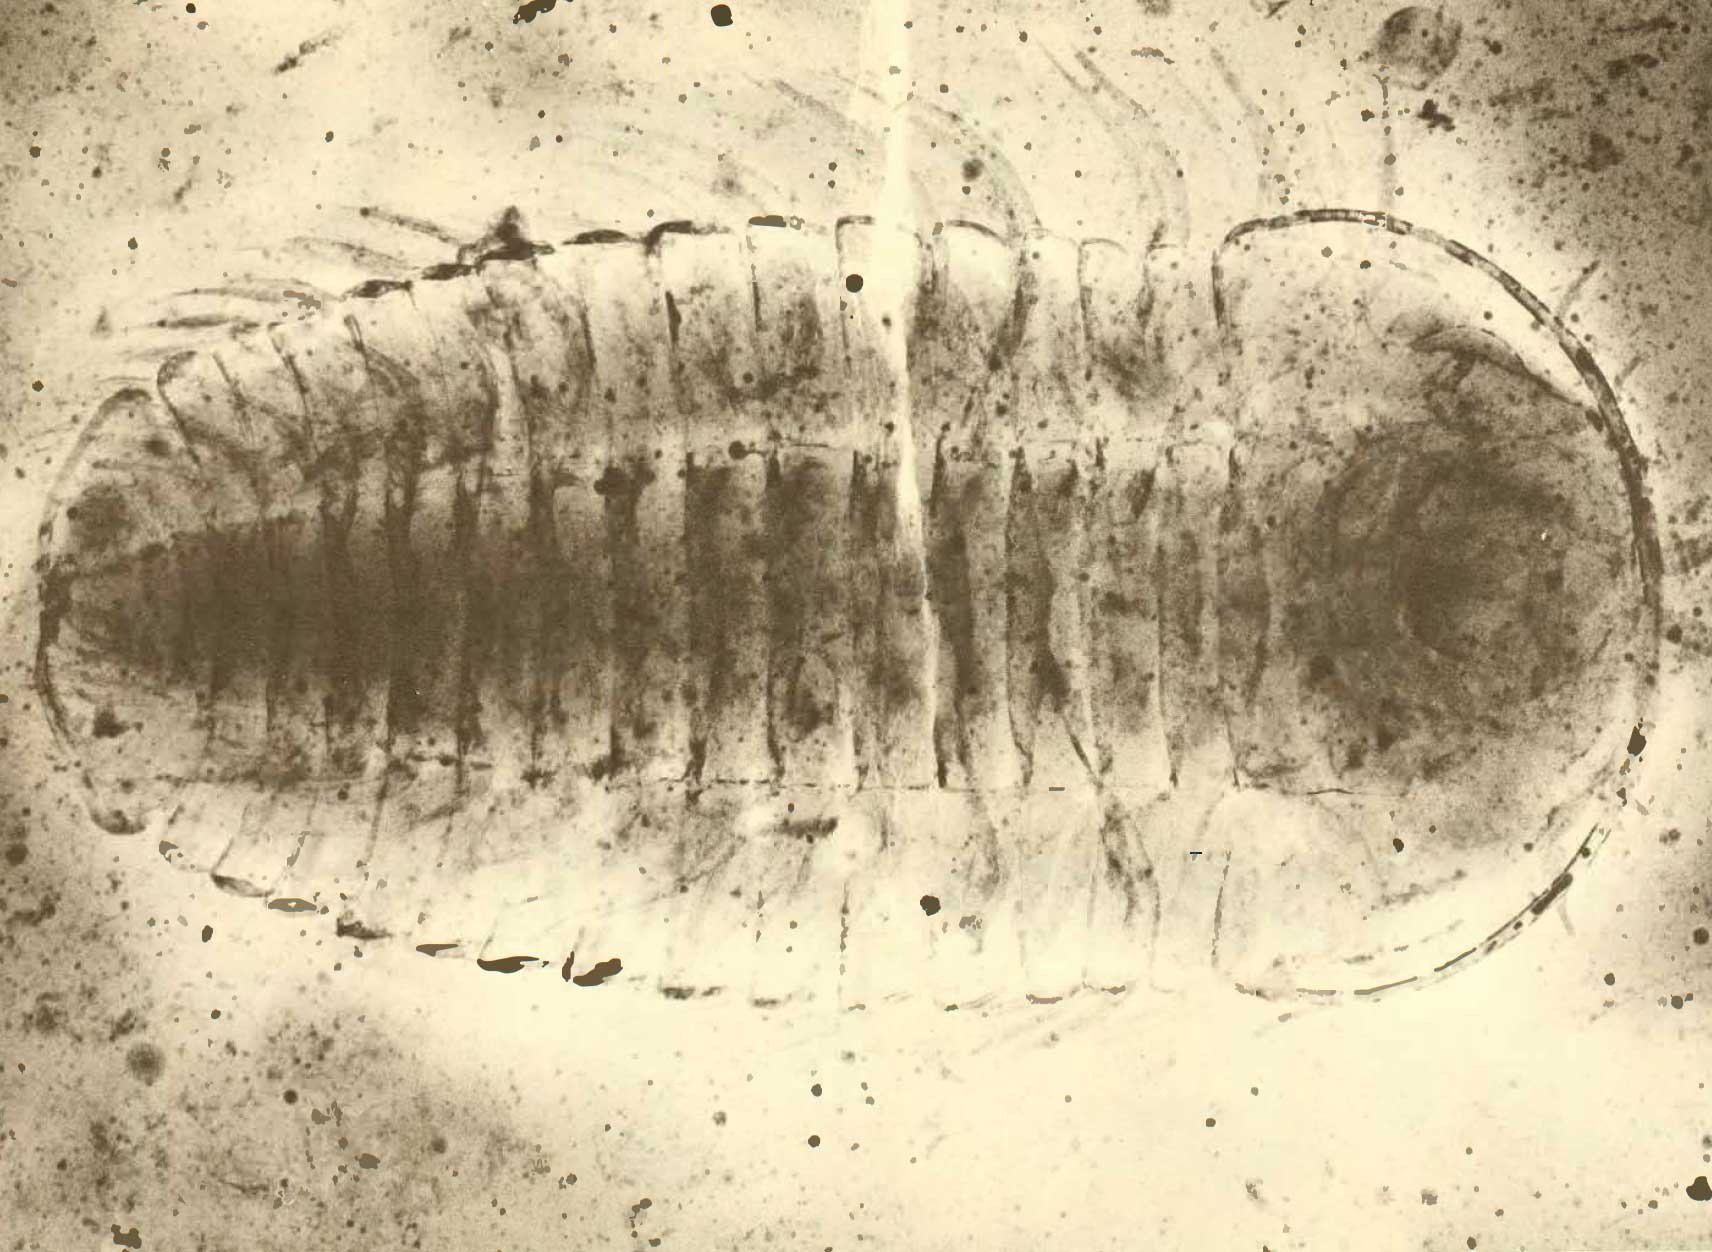 X-ray image of a specimen of the trilobite Trarthrus eatoni, showing the preservation of limbs. X-ray image from John Cisne (1981).